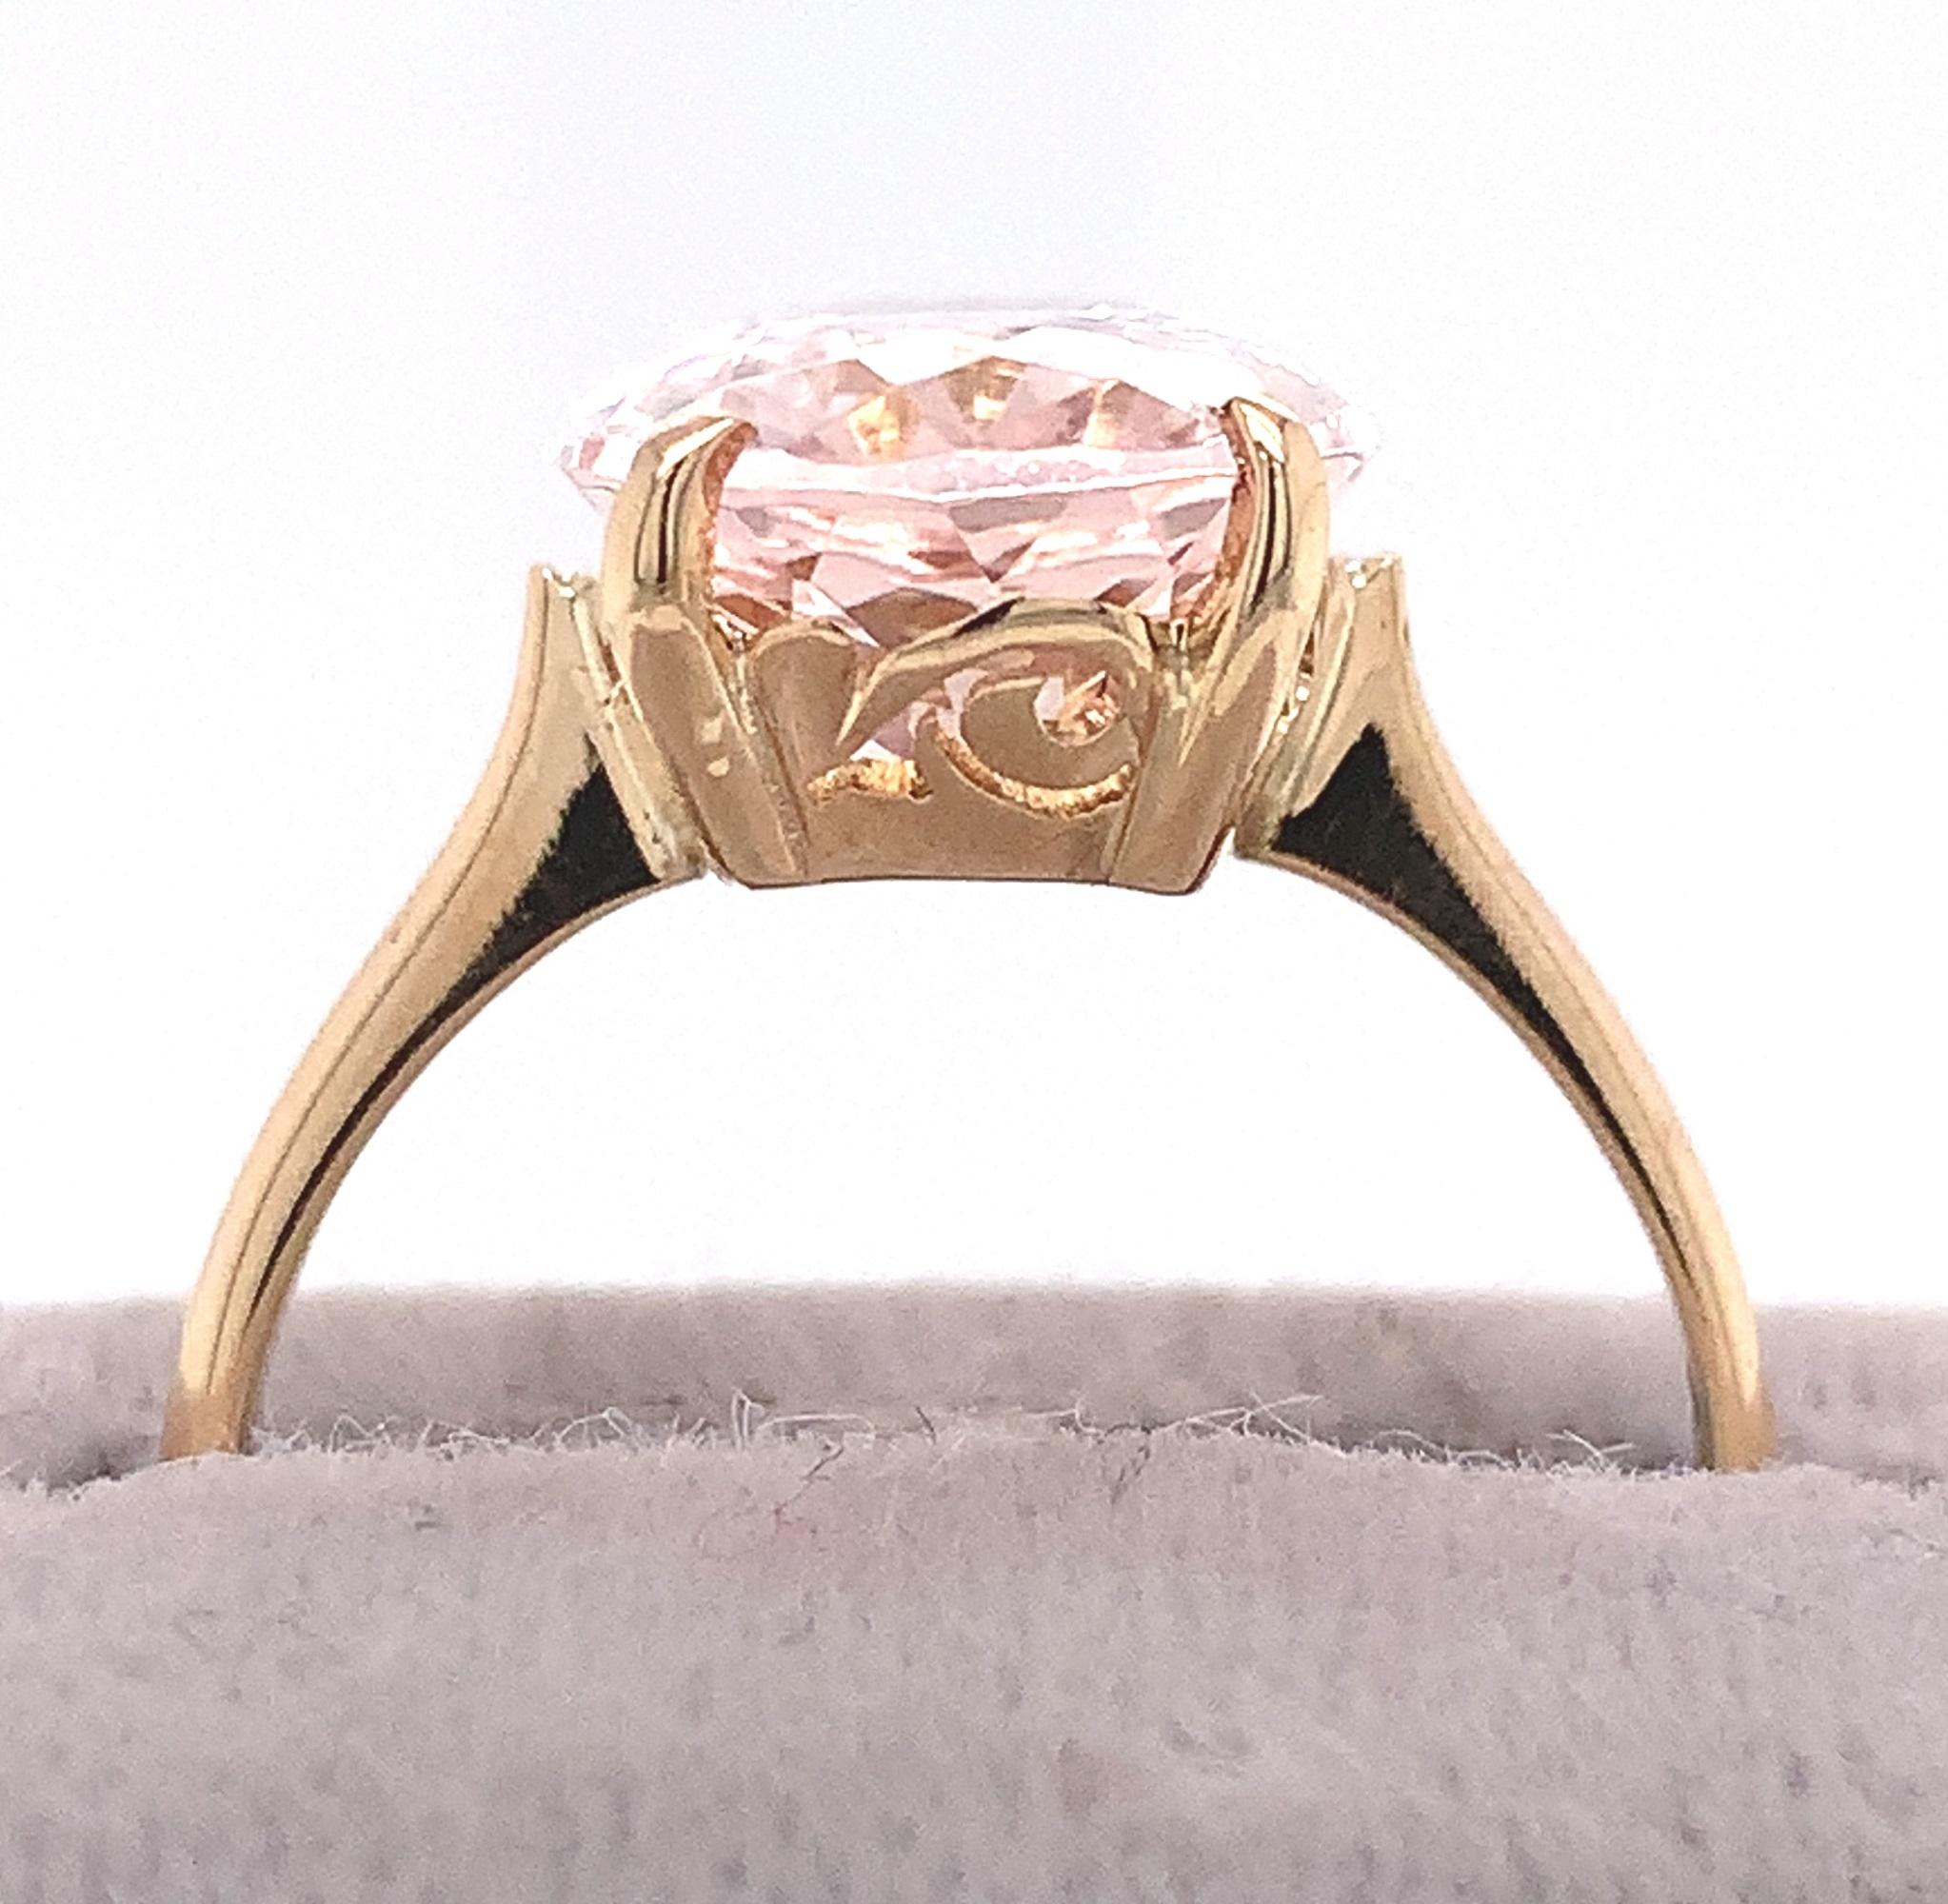 Oval Cut 5.21ct Oval Morganite Solitaire 14K Ring